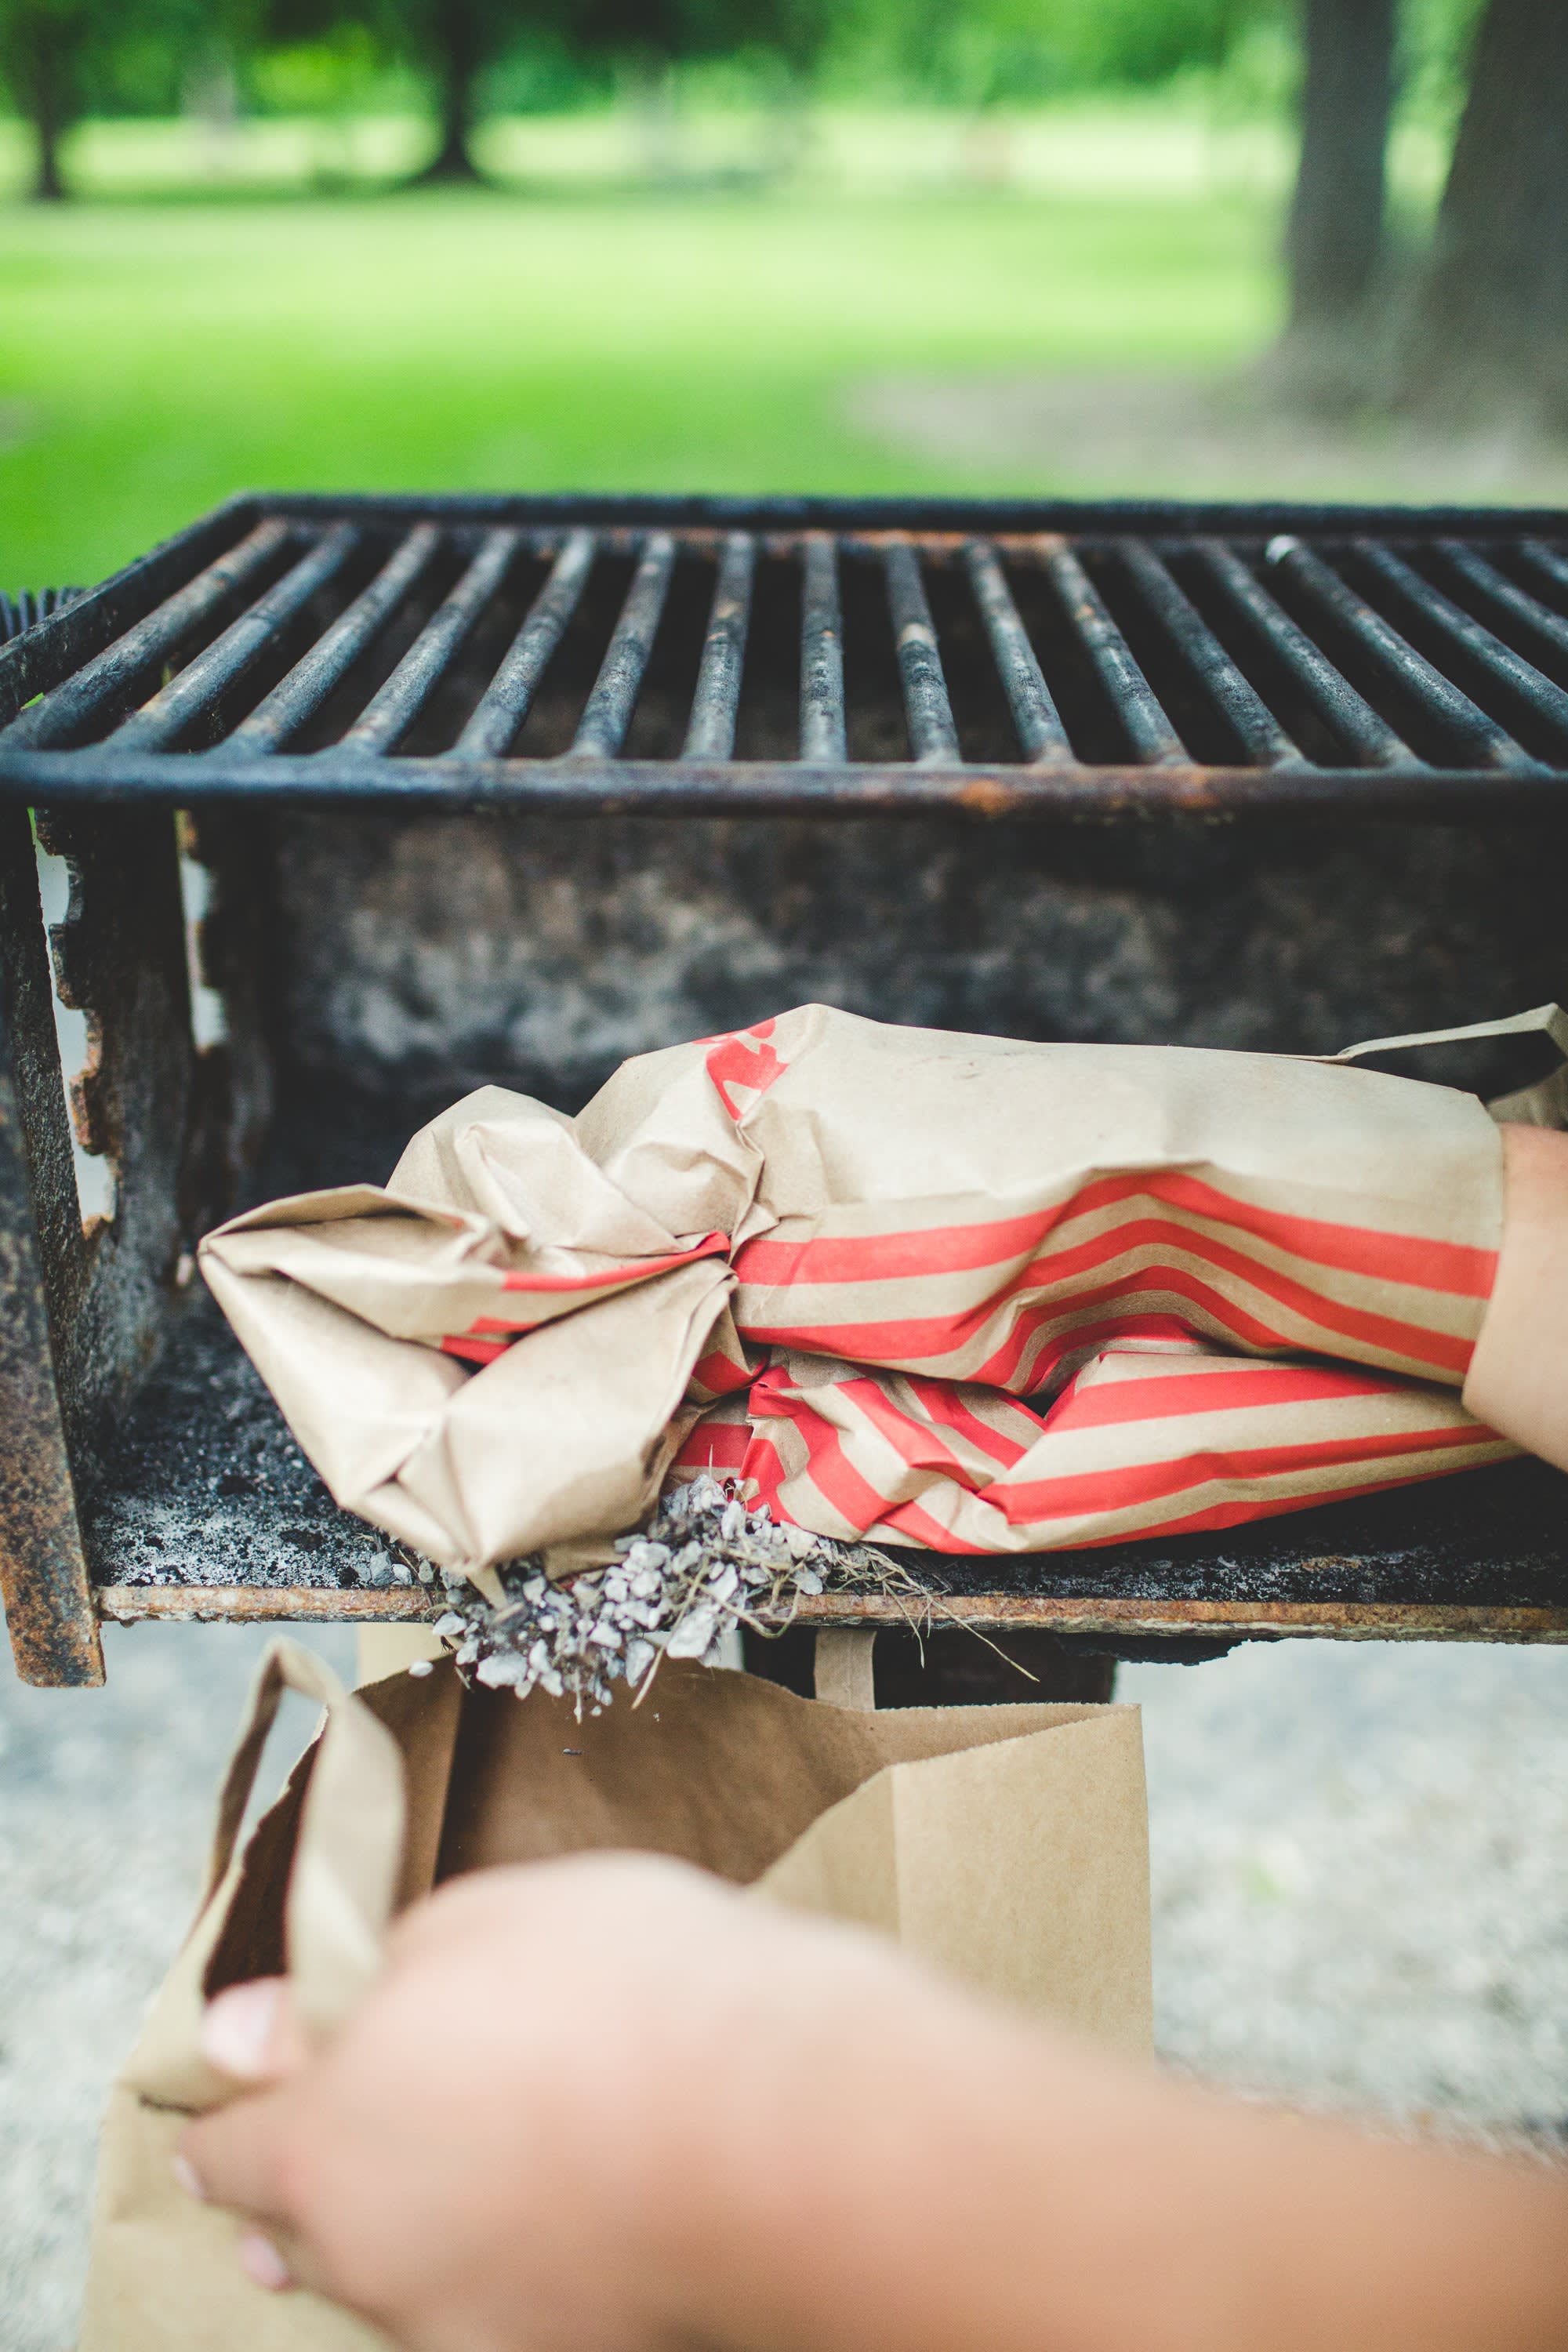 You Don't Need an Outdoor Space to Grill—Here's Why